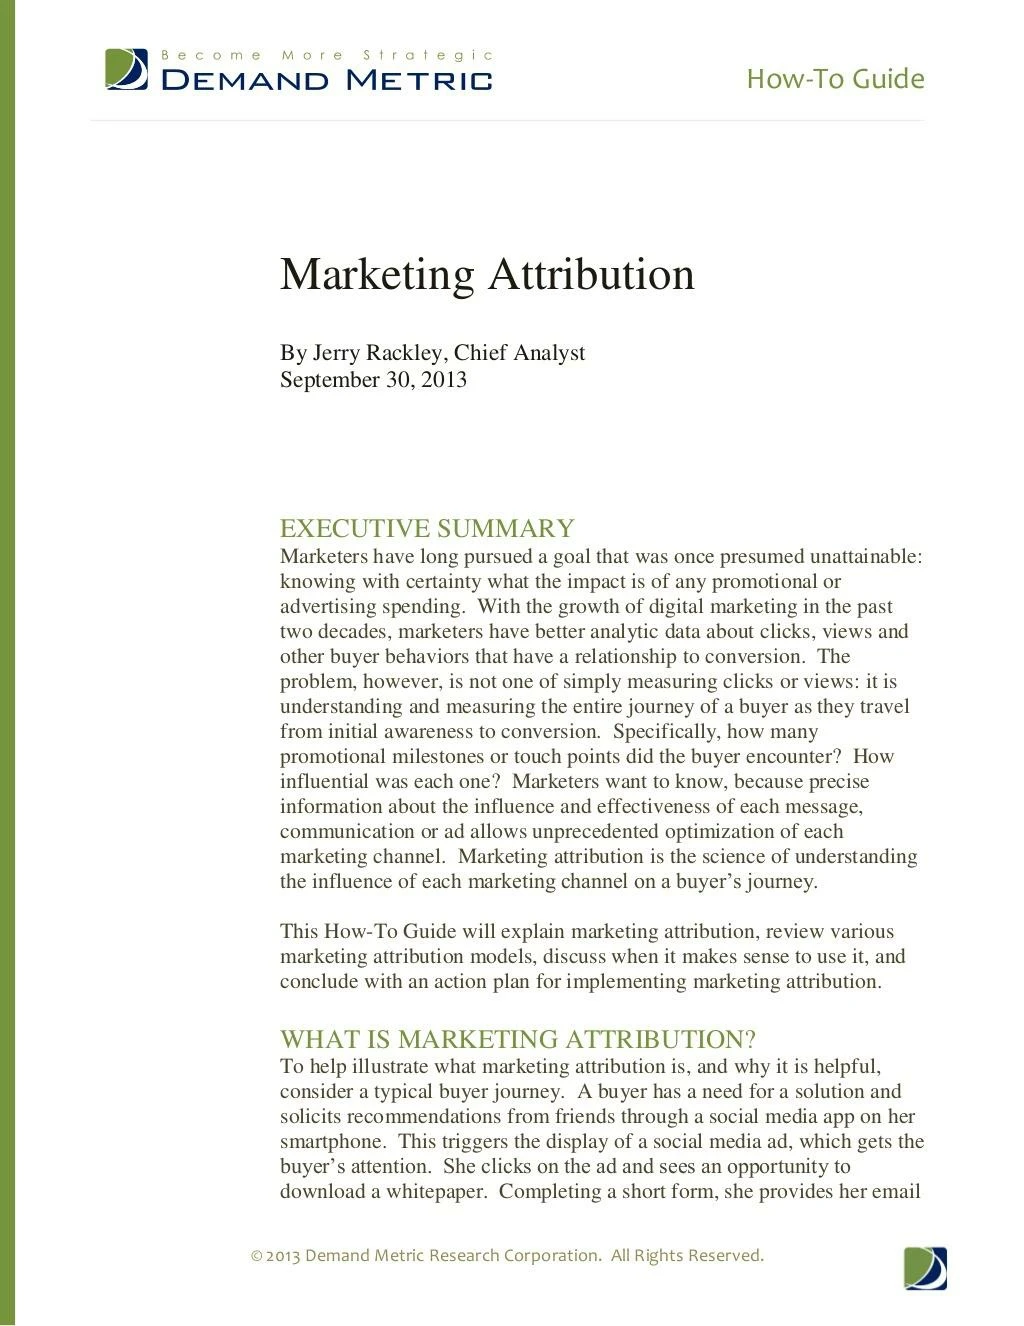 how to guide marketing attribution